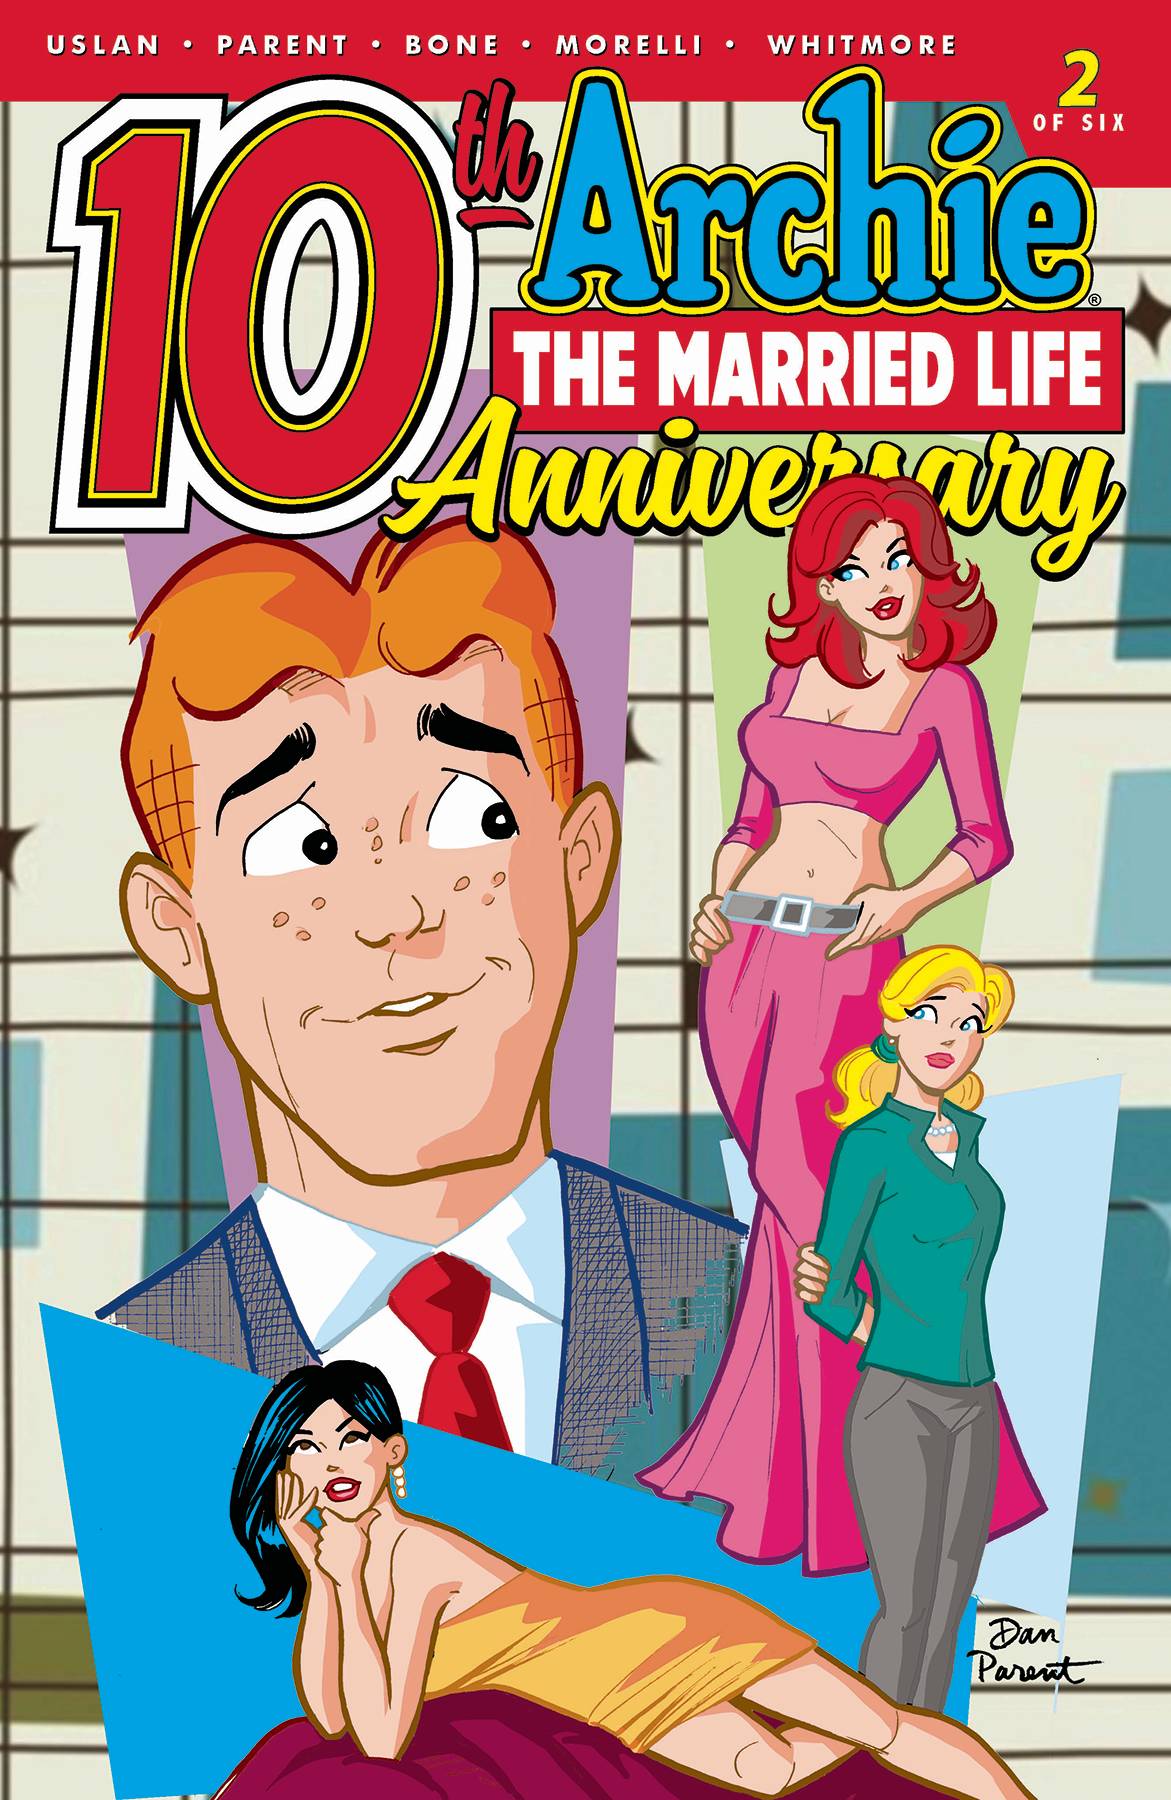 Archie Married Life 10 Years Later #2 Cover A Parent